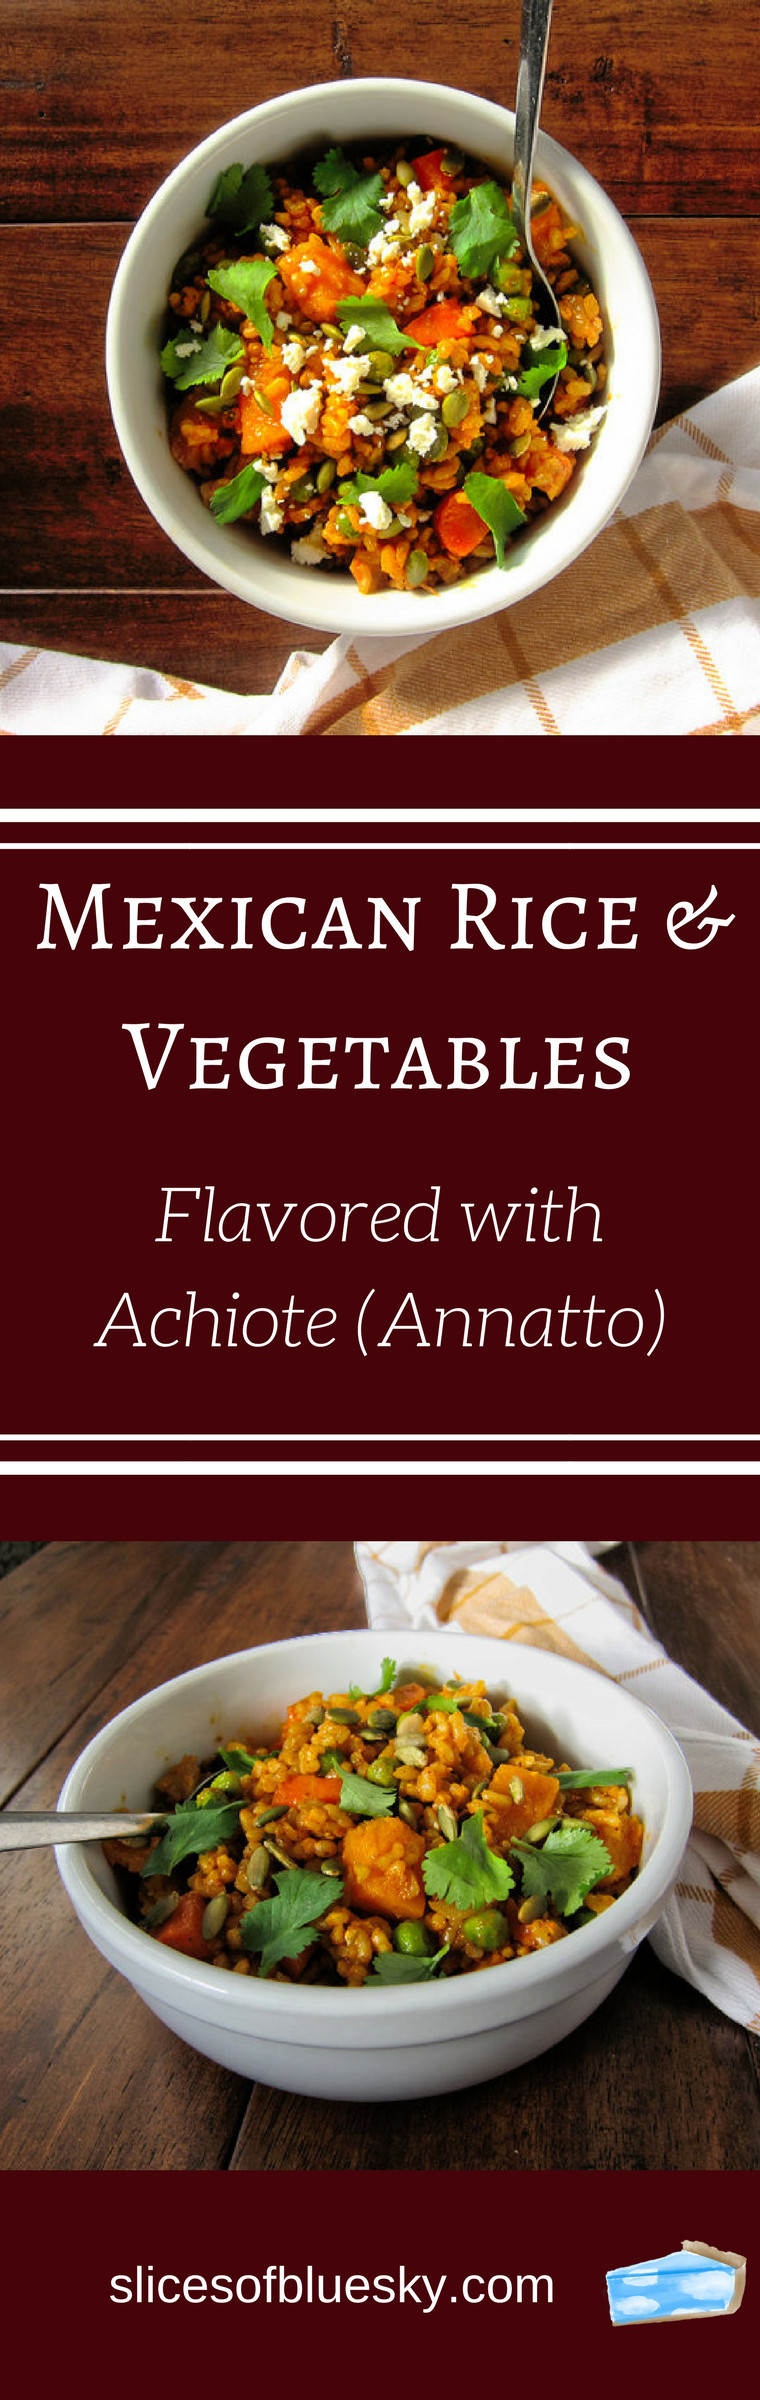 Gourmet Mexican Recipes
 Rice and Ve ables in Achiote Broth Recipe